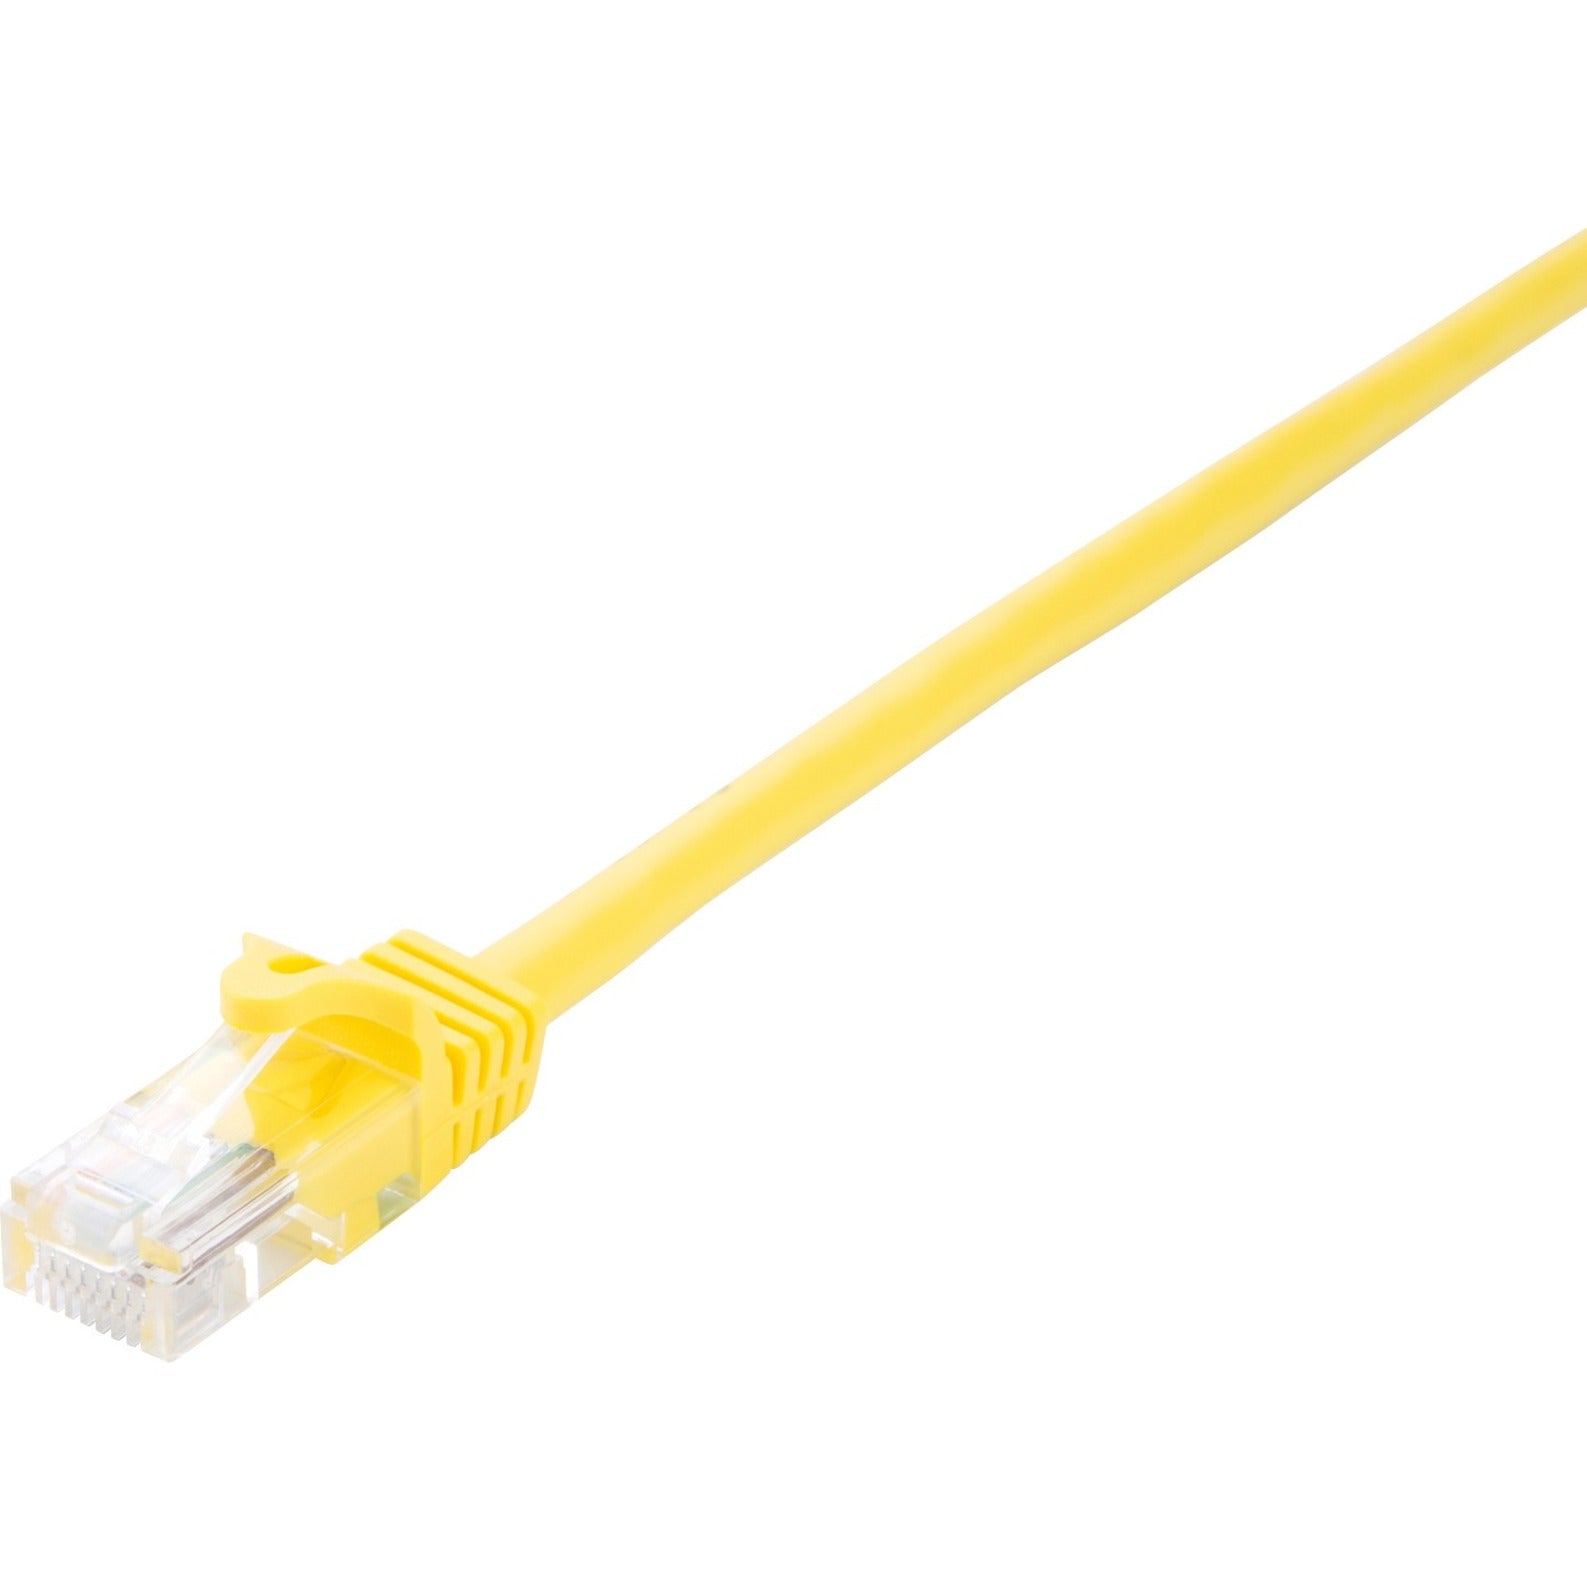 V7 V7CAT6UTP-01M-YLW-1N Yellow Cat6 Unshielded (UTP) Cable RJ45 Male to RJ45 Male 1m 3.3ft, Crosstalk Protection, Noise Reducing, Molded, Strain Relief, Snagless Boot